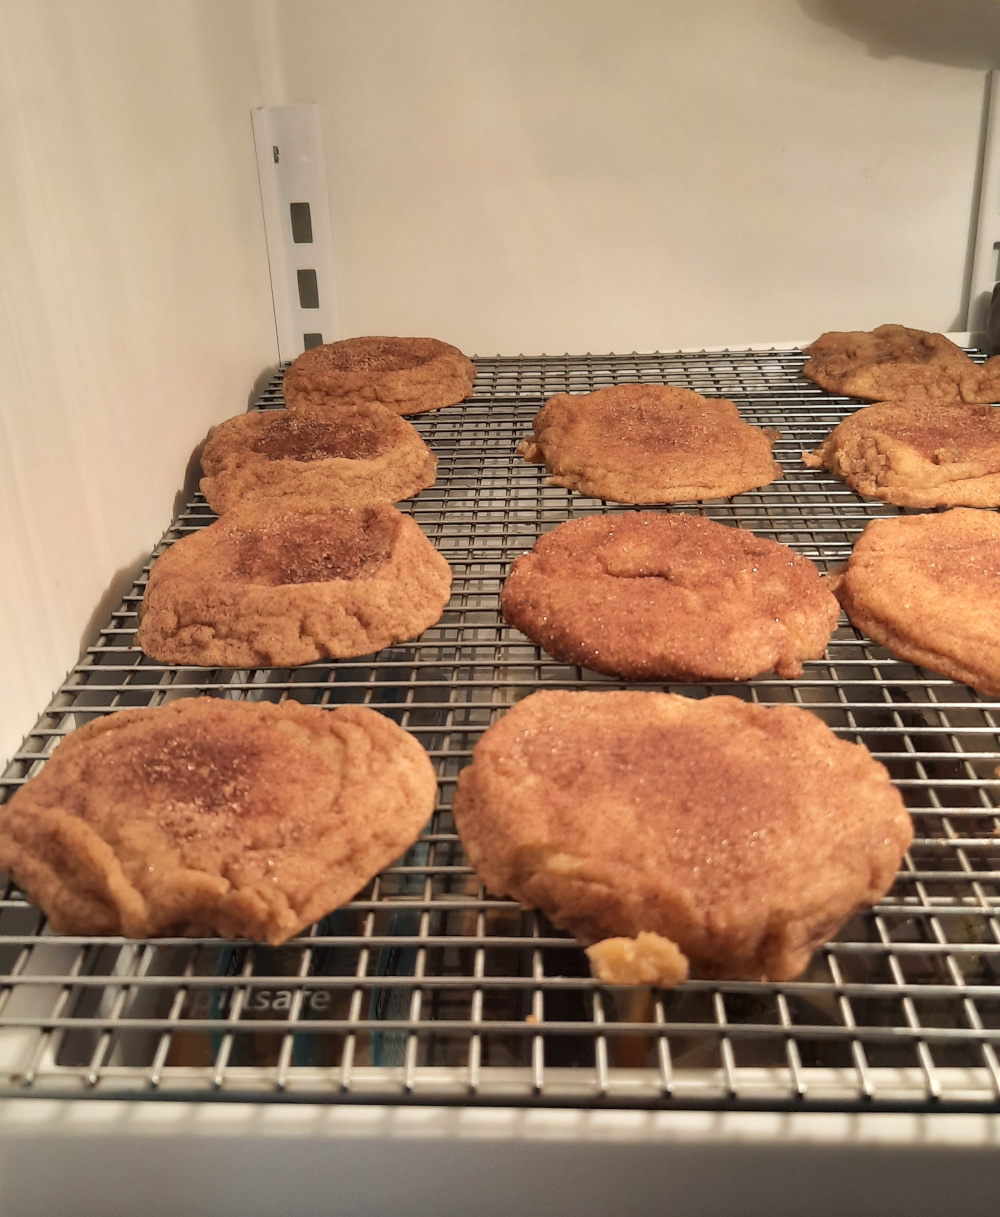 Some snickerdoodles in my freezer, kinda wrinkled and all.